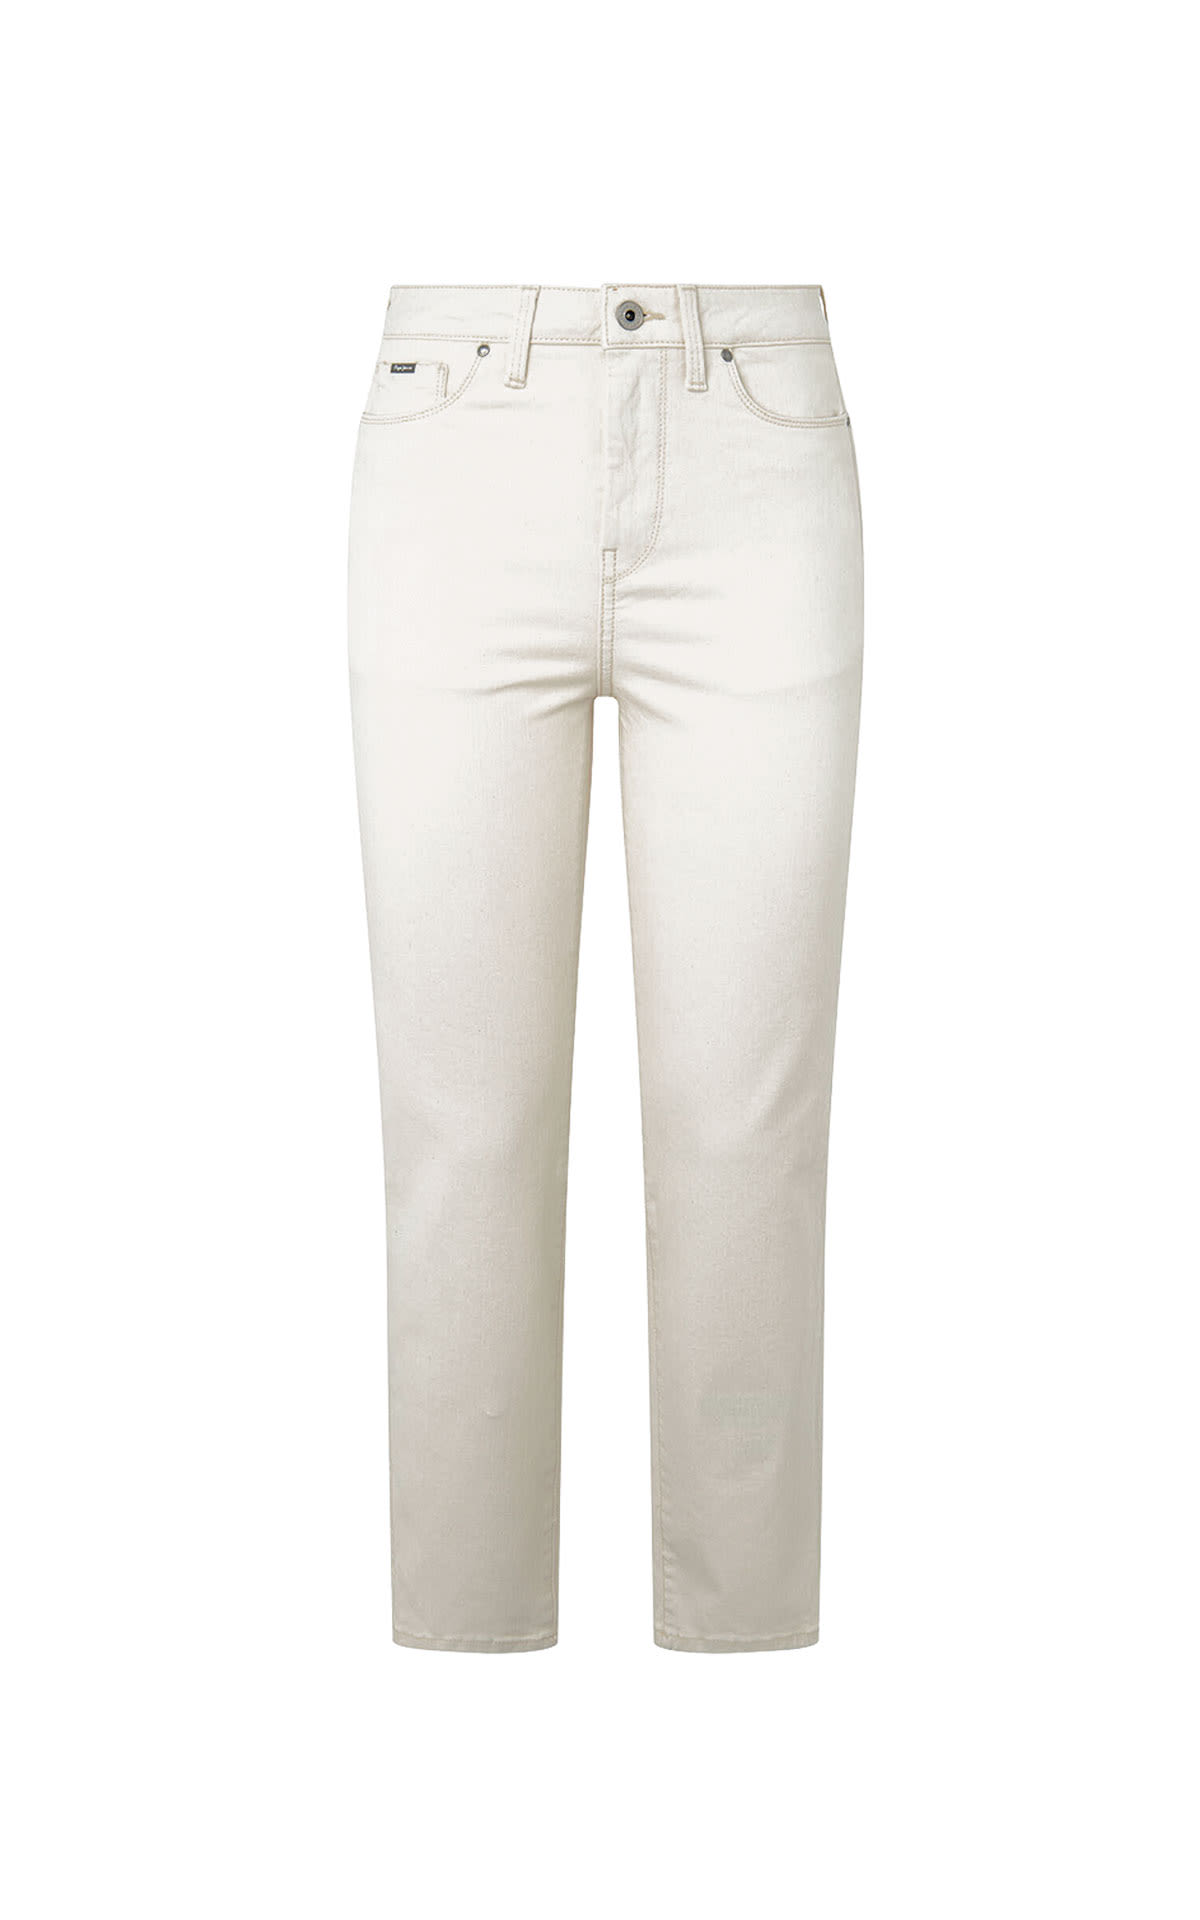 White jeans Pepe Jeans